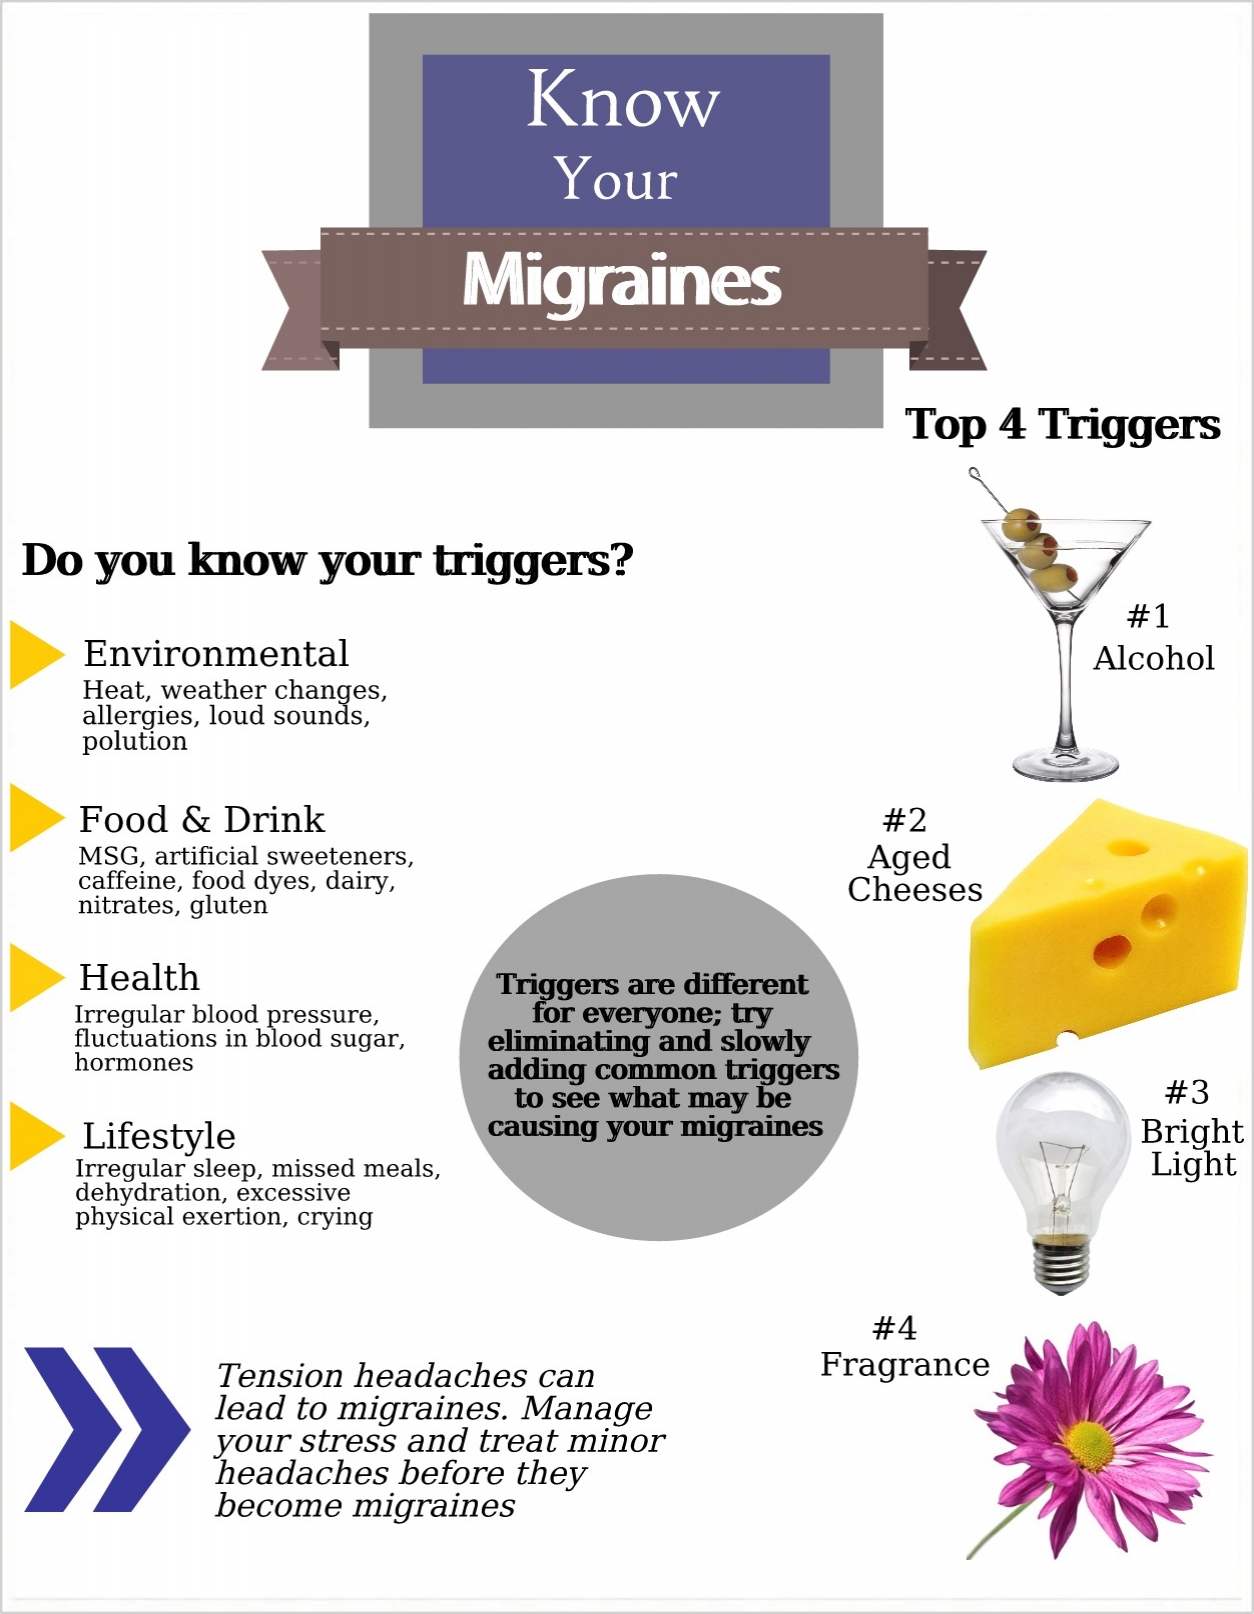 Migraines are debilitating, especially when one hits without